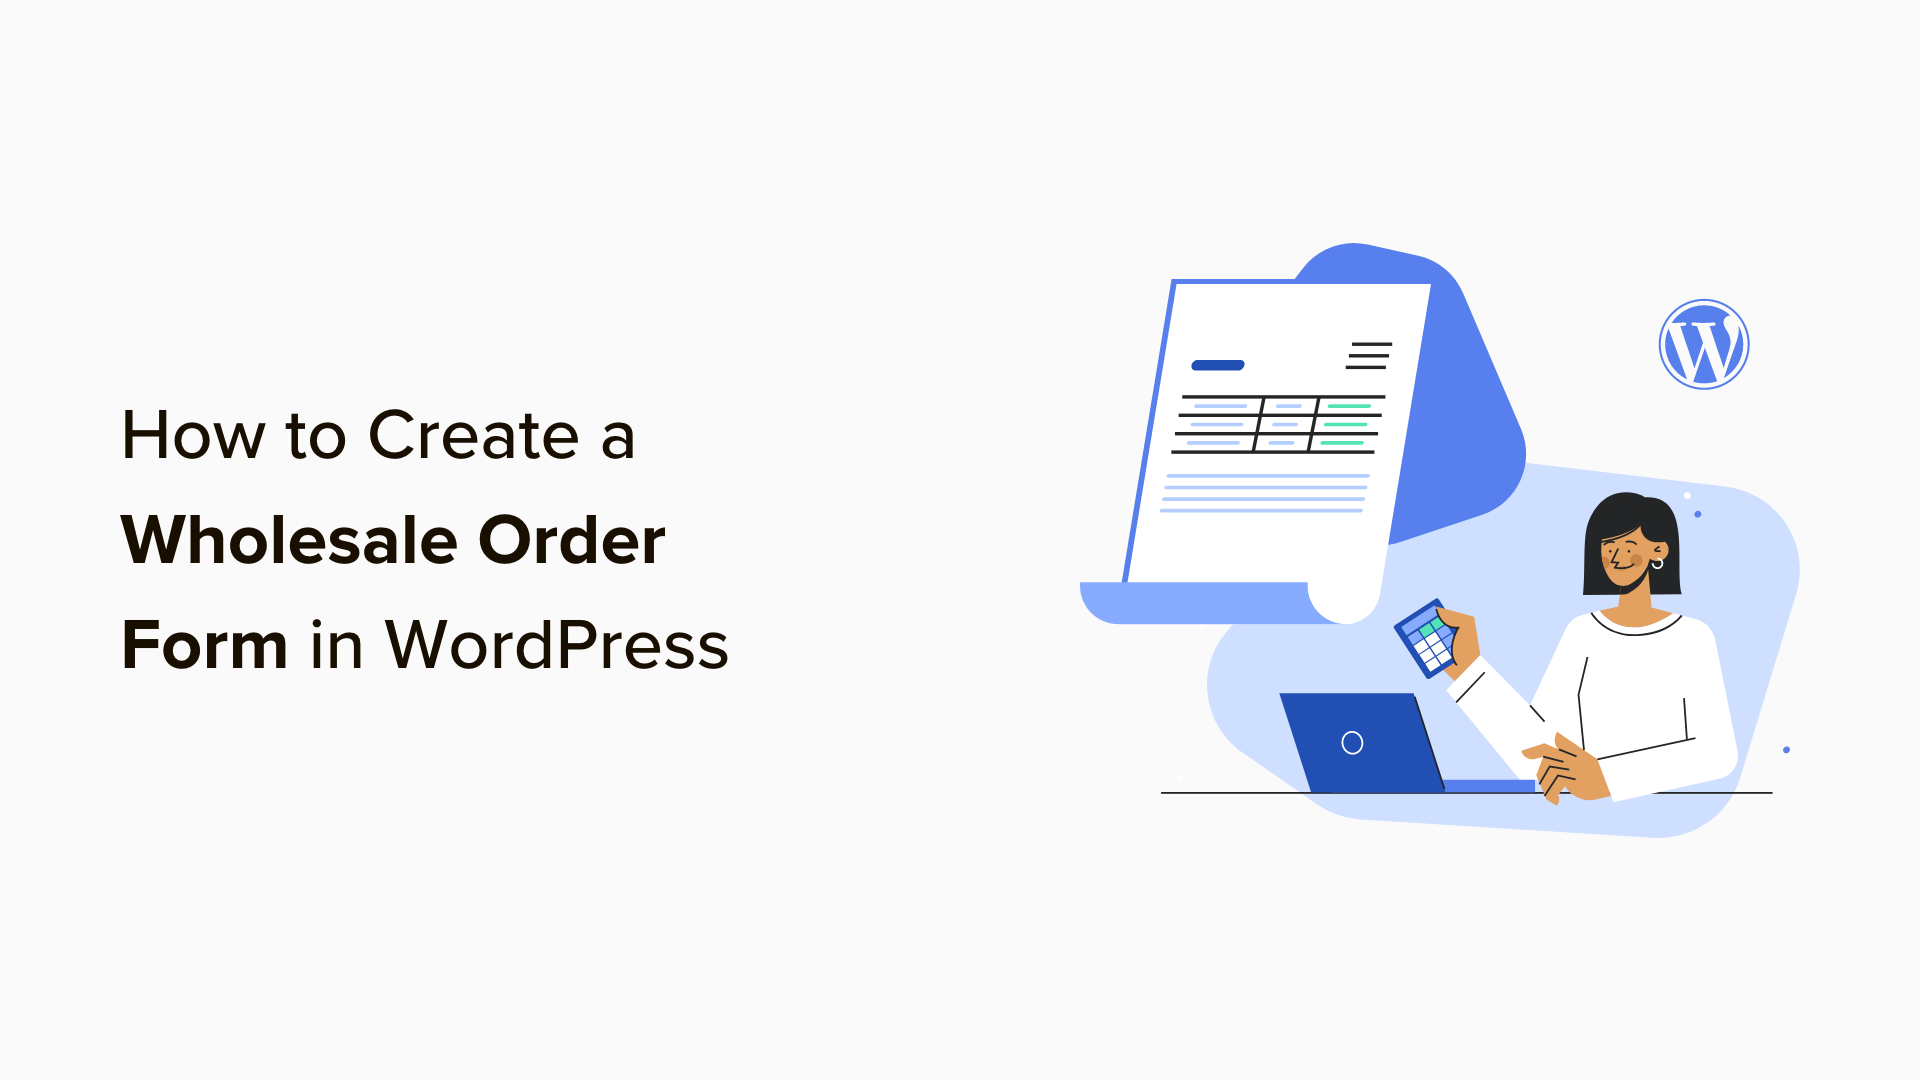 how-to-create-a-wholesale-order-form-in-wordpress-3-ways